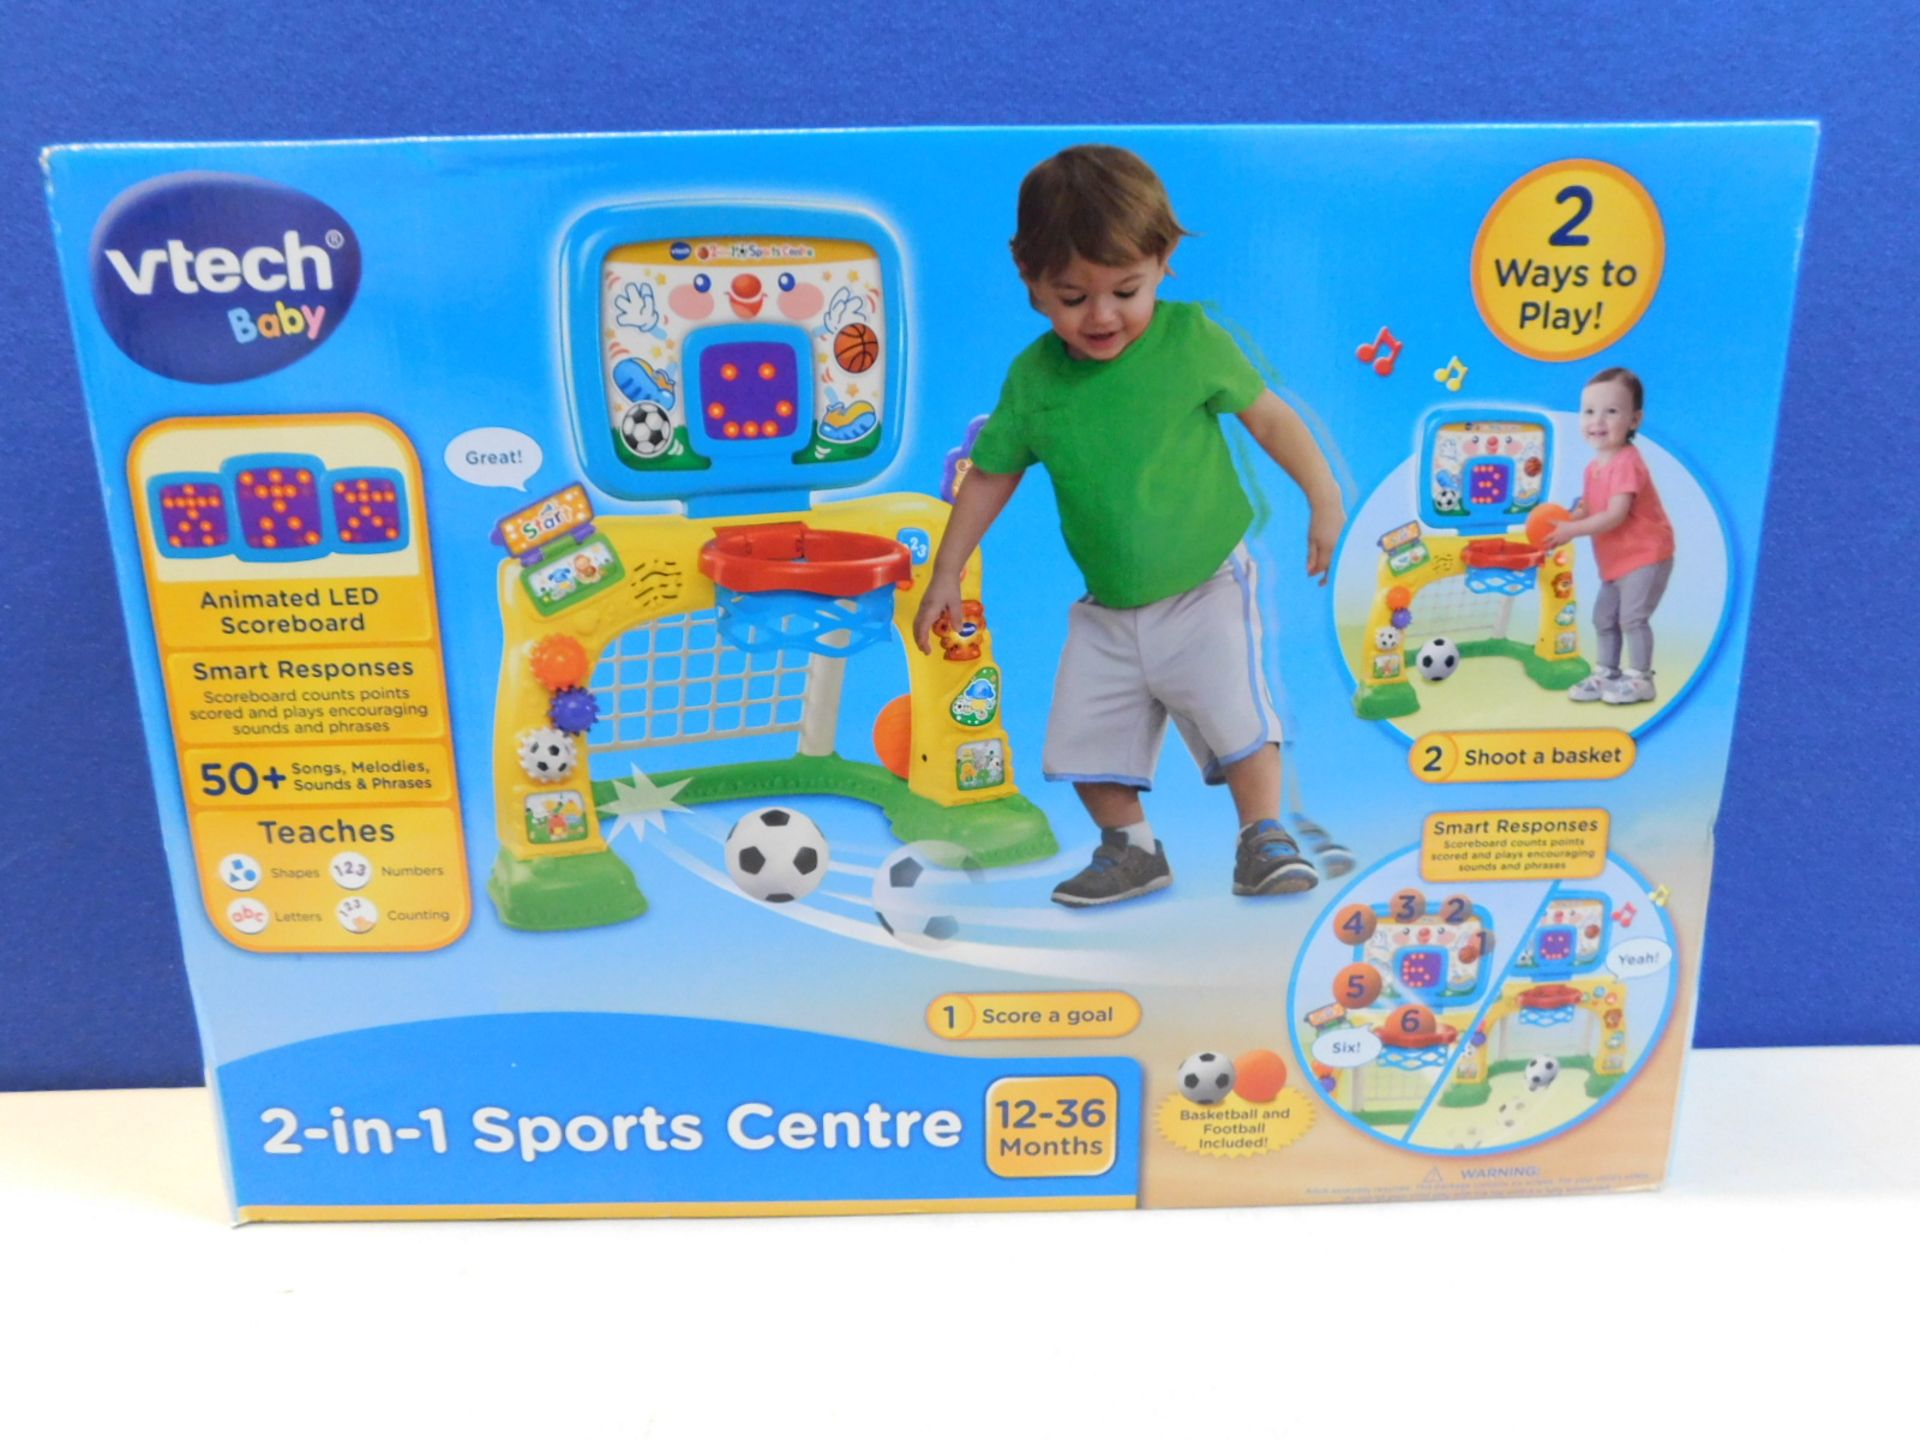 1 BRAND NEW BOXED VTECH 2-IN-1 SPORTS CENTRE RRP £49.99